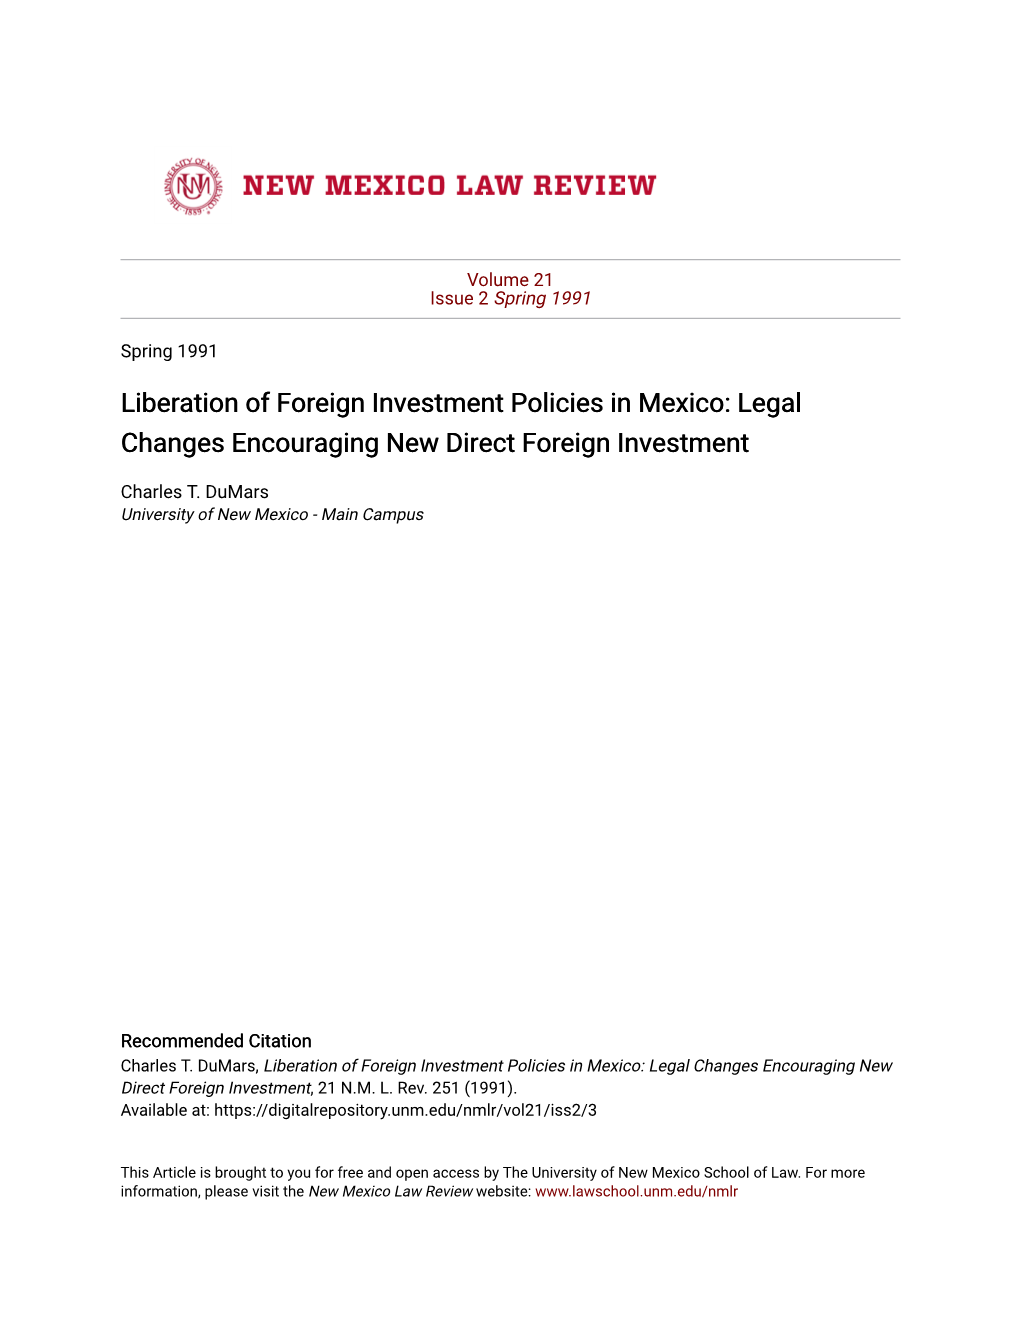 Liberation of Foreign Investment Policies in Mexico: Legal Changes Encouraging New Direct Foreign Investment